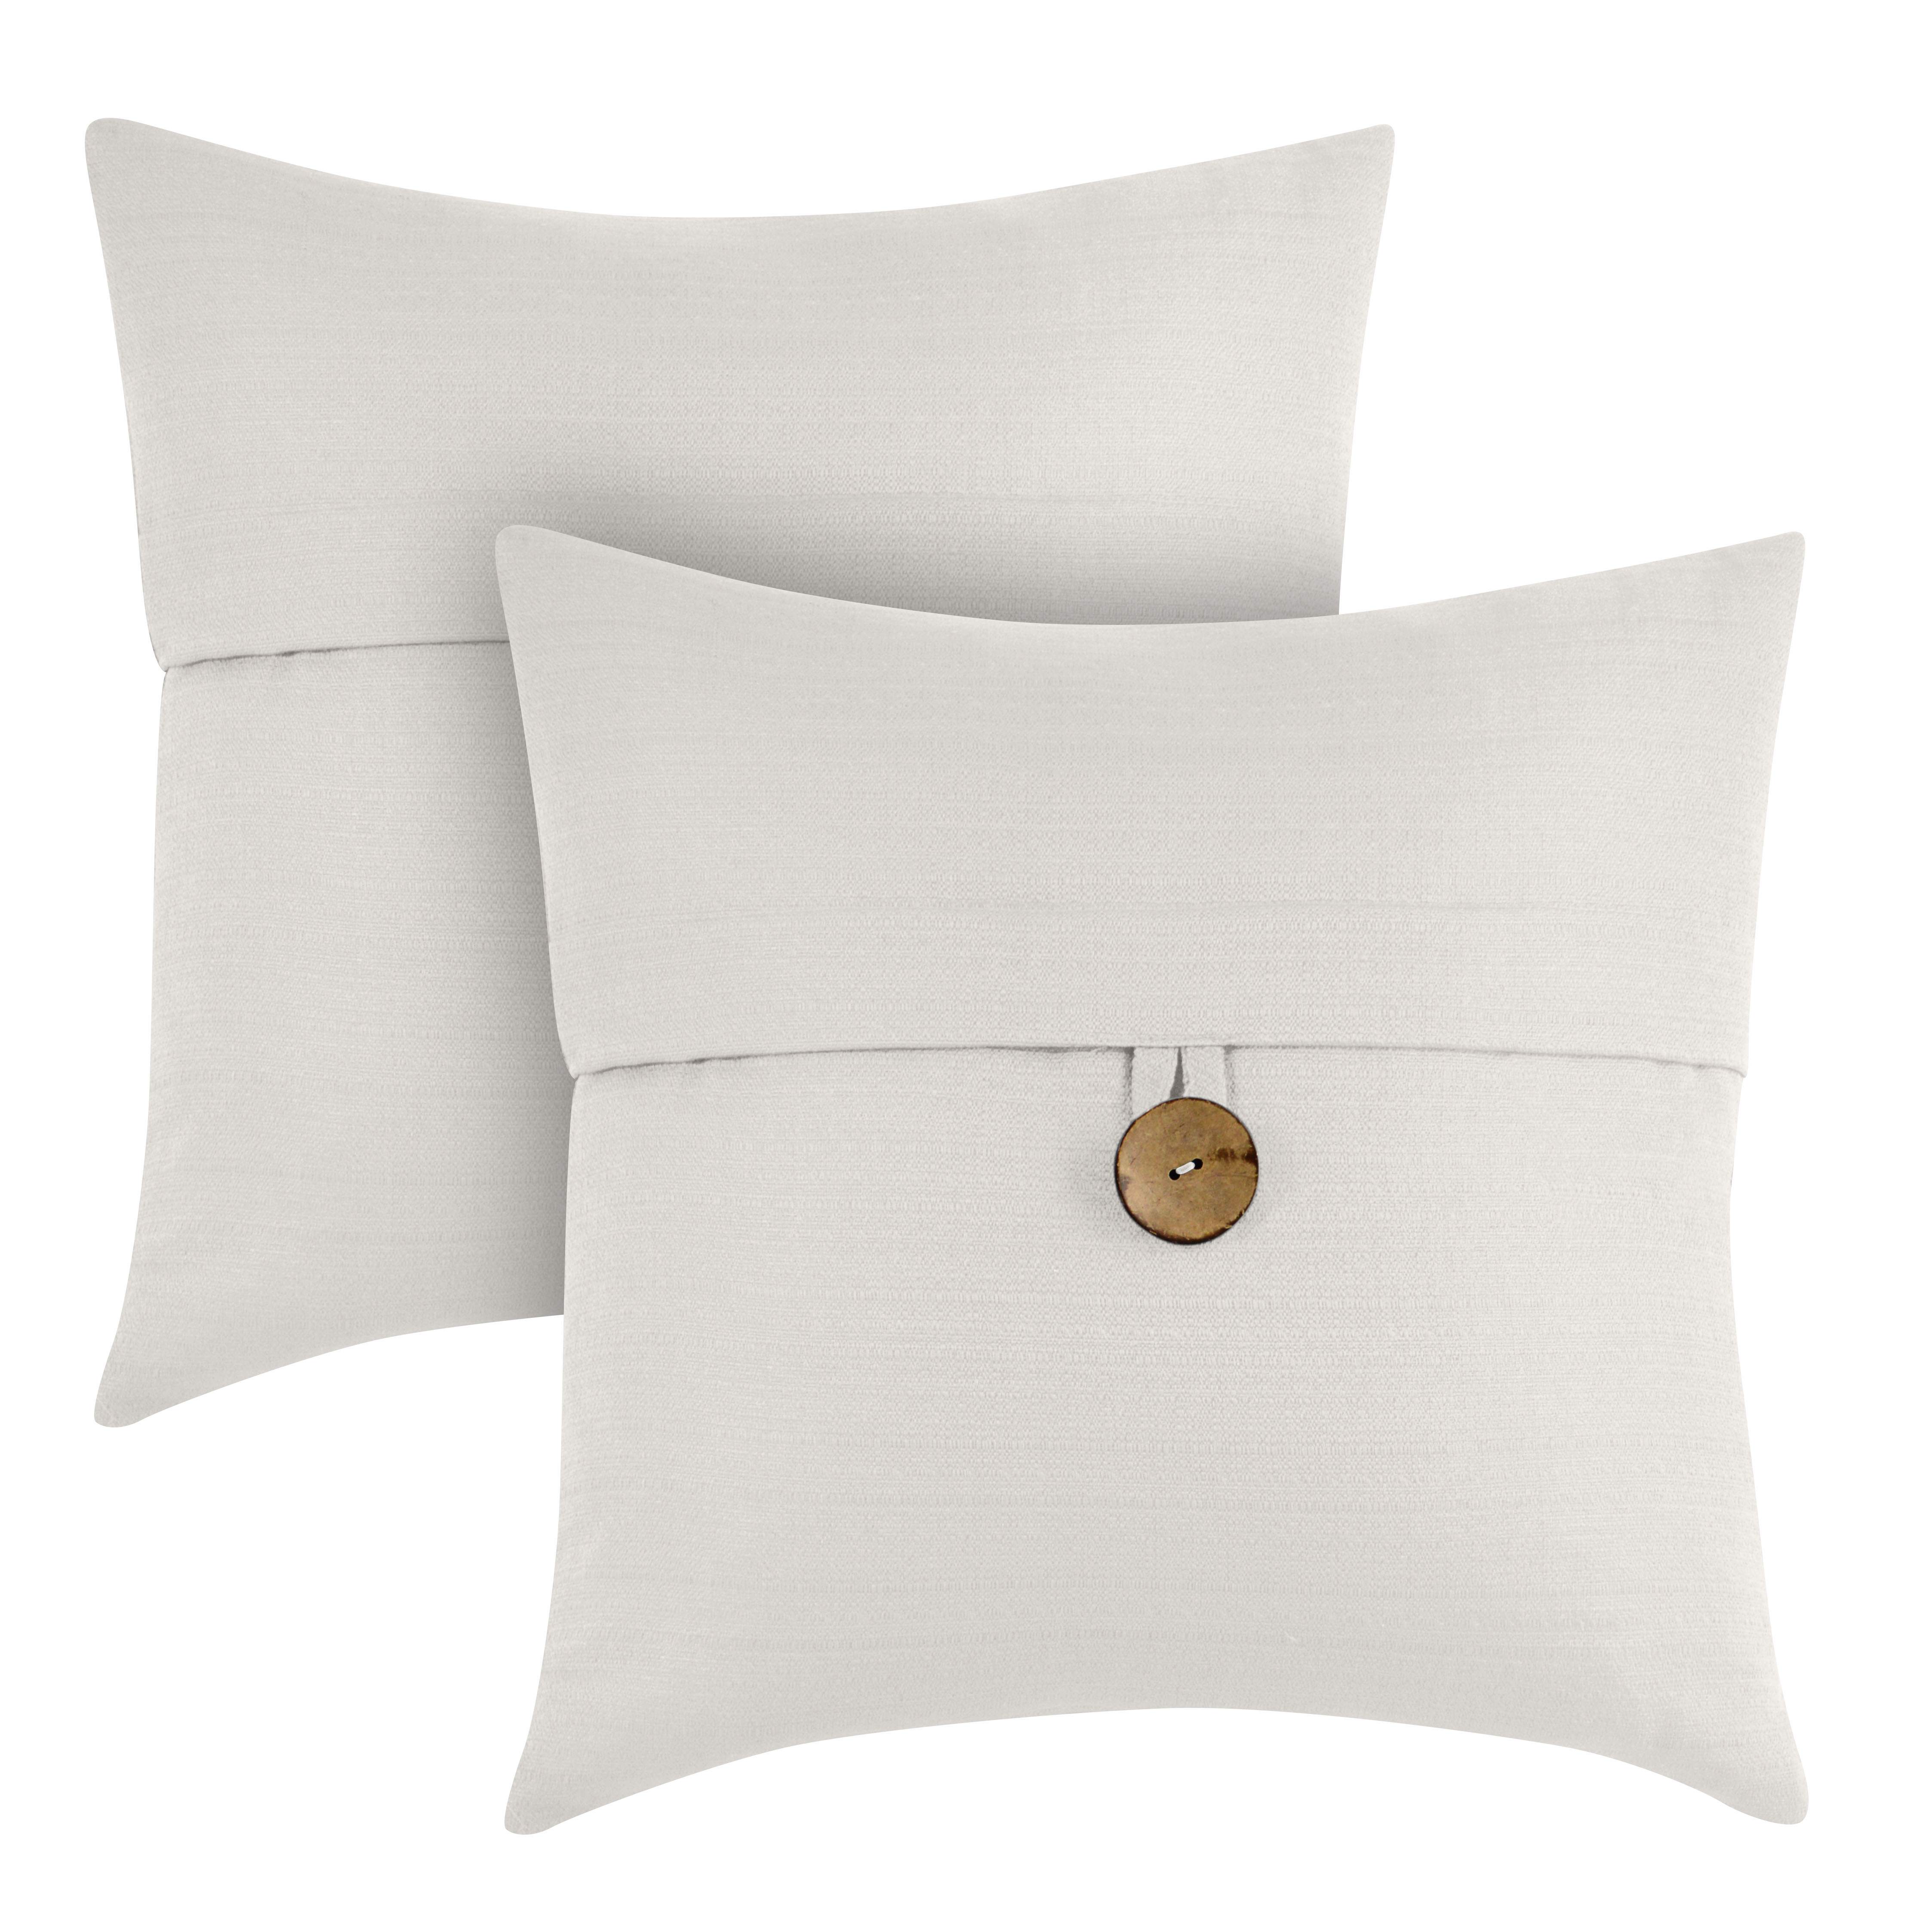 Better Homes & Gardens Feather Filled Banded Button Decorative Throw Pillow, 20" x 20", White, 2 Pack - image 1 of 7